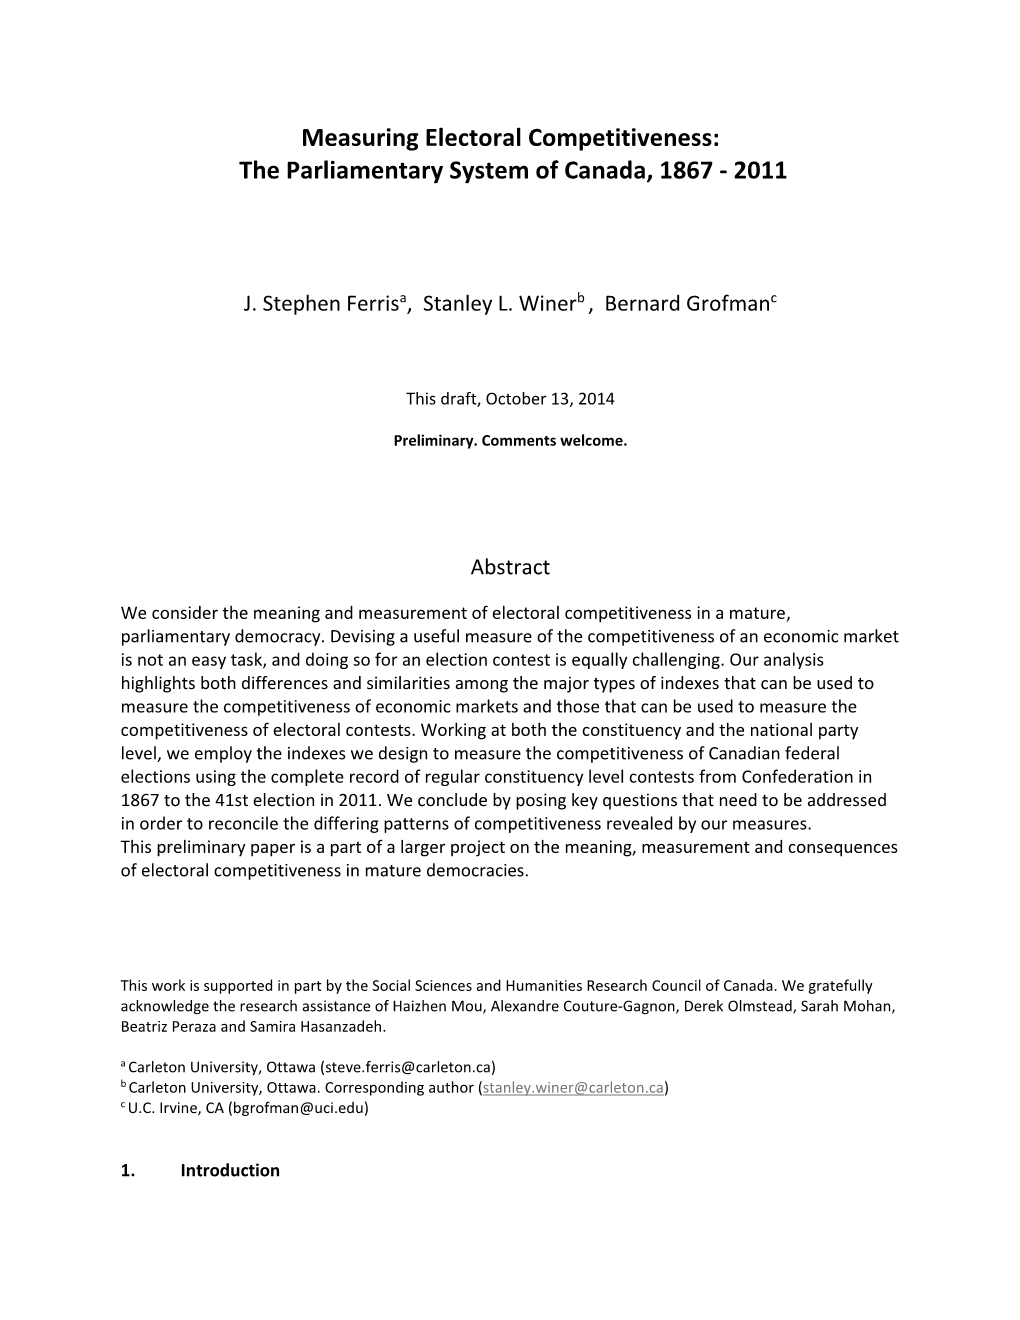 Measuring Electoral Competitiveness: the Parliamentary System of Canada, 1867 - 2011